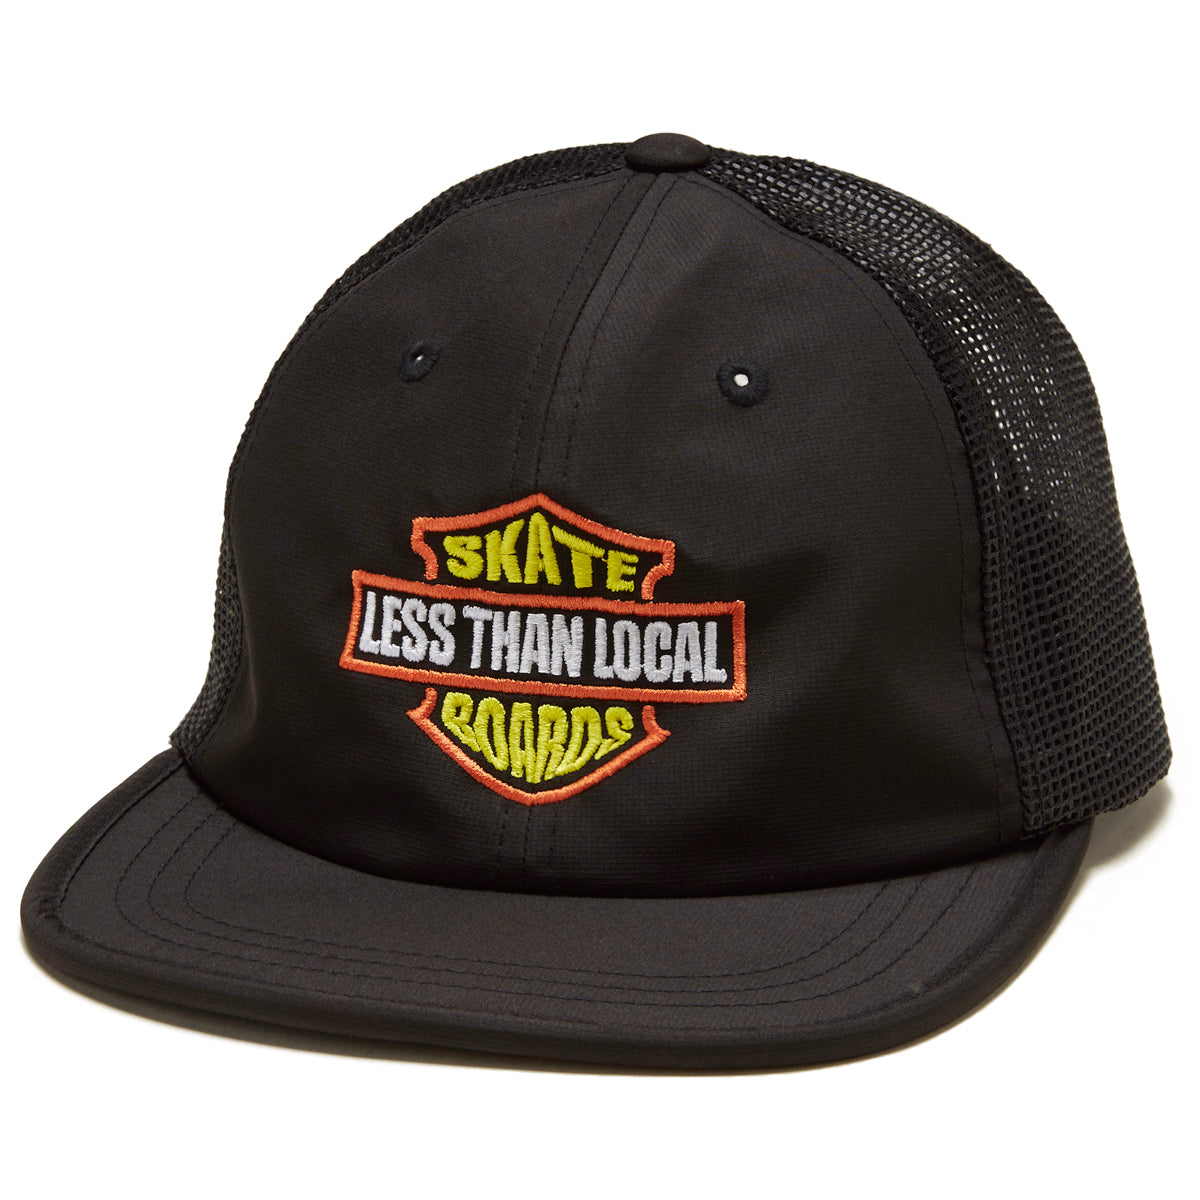 Less Than Local Hawg Hat - Black image 1